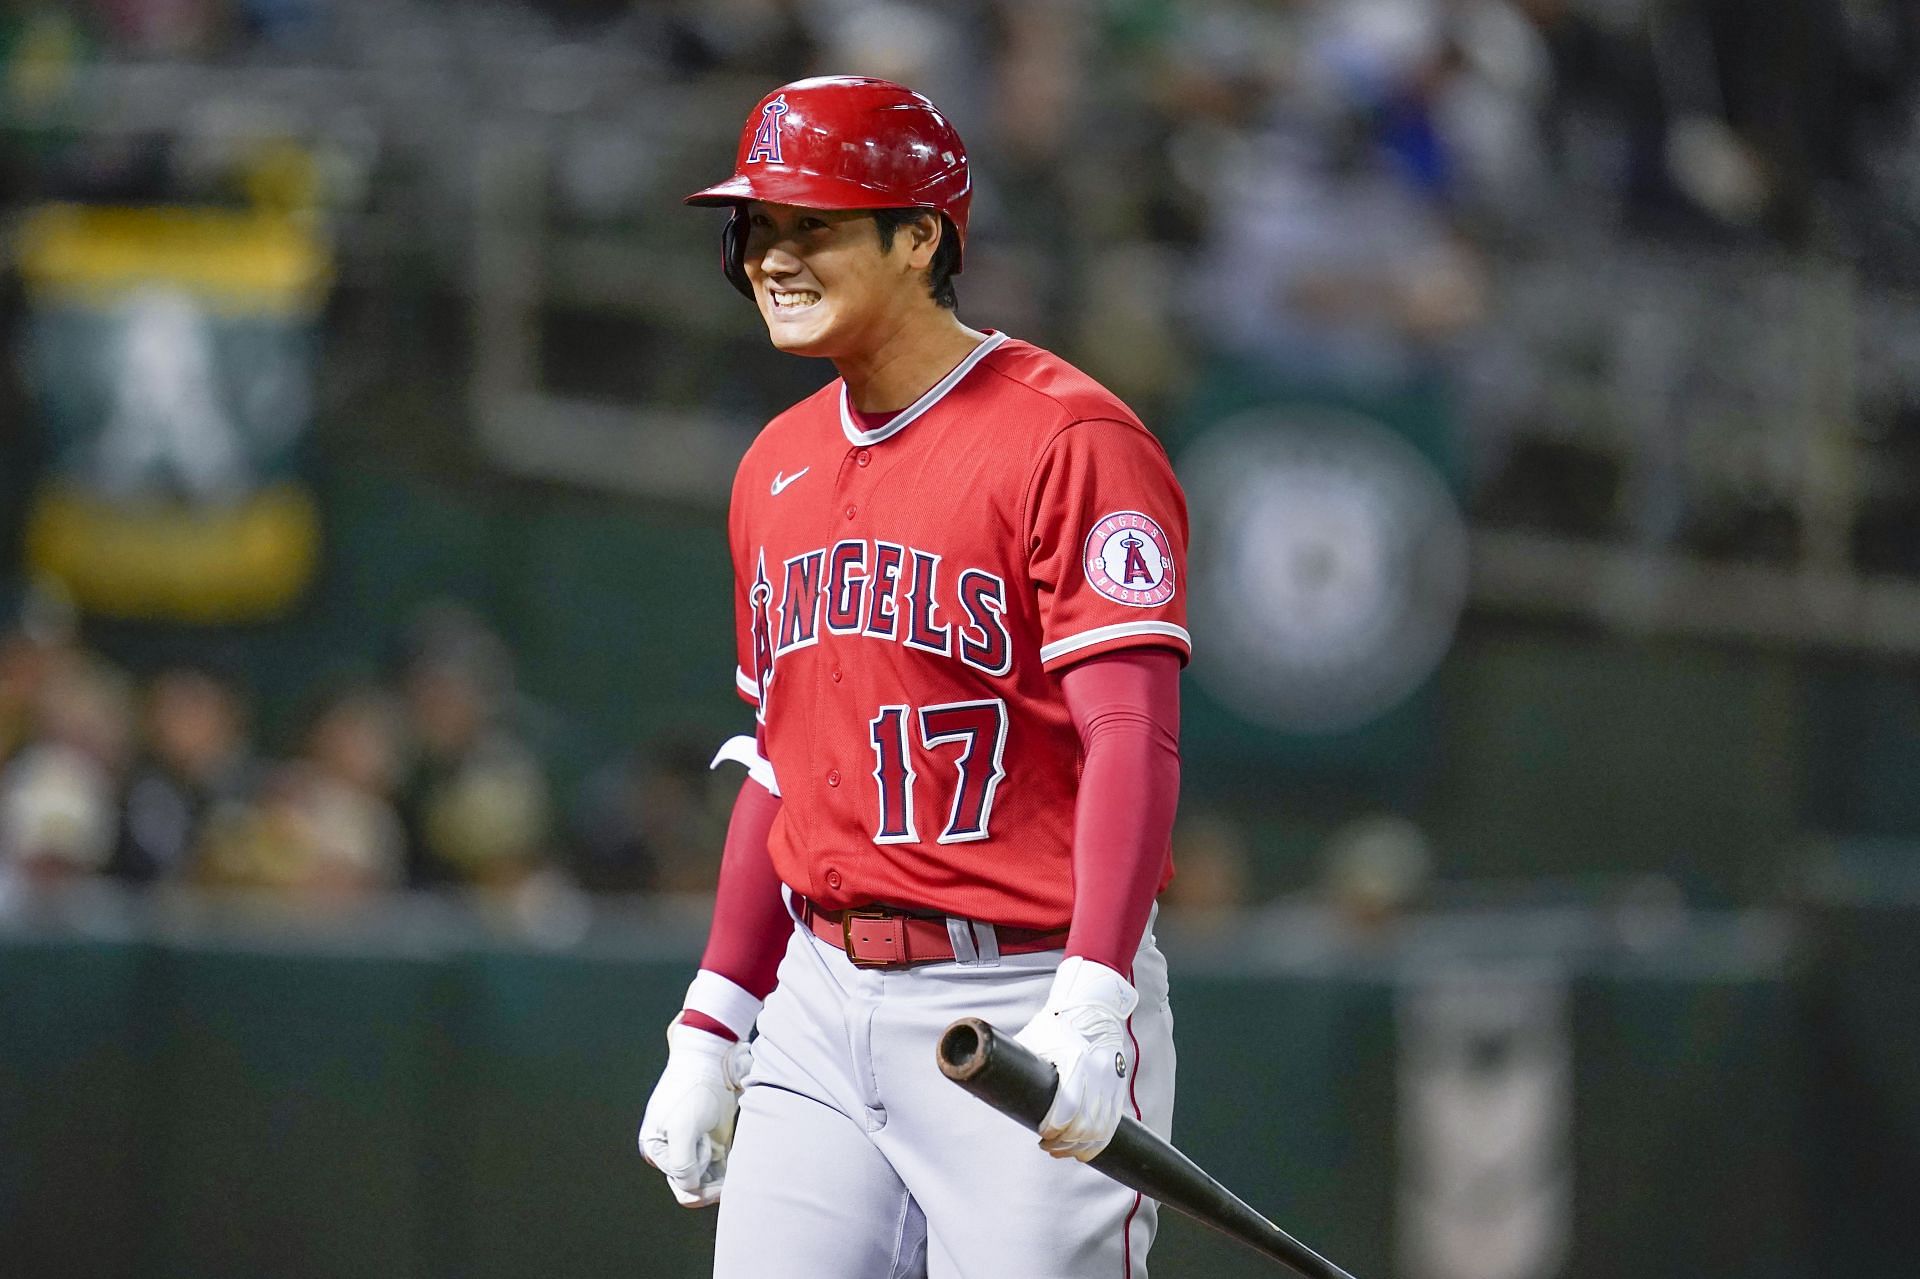 Baseball: Shohei Ohtani joins Japan as excitement builds ahead of WBC